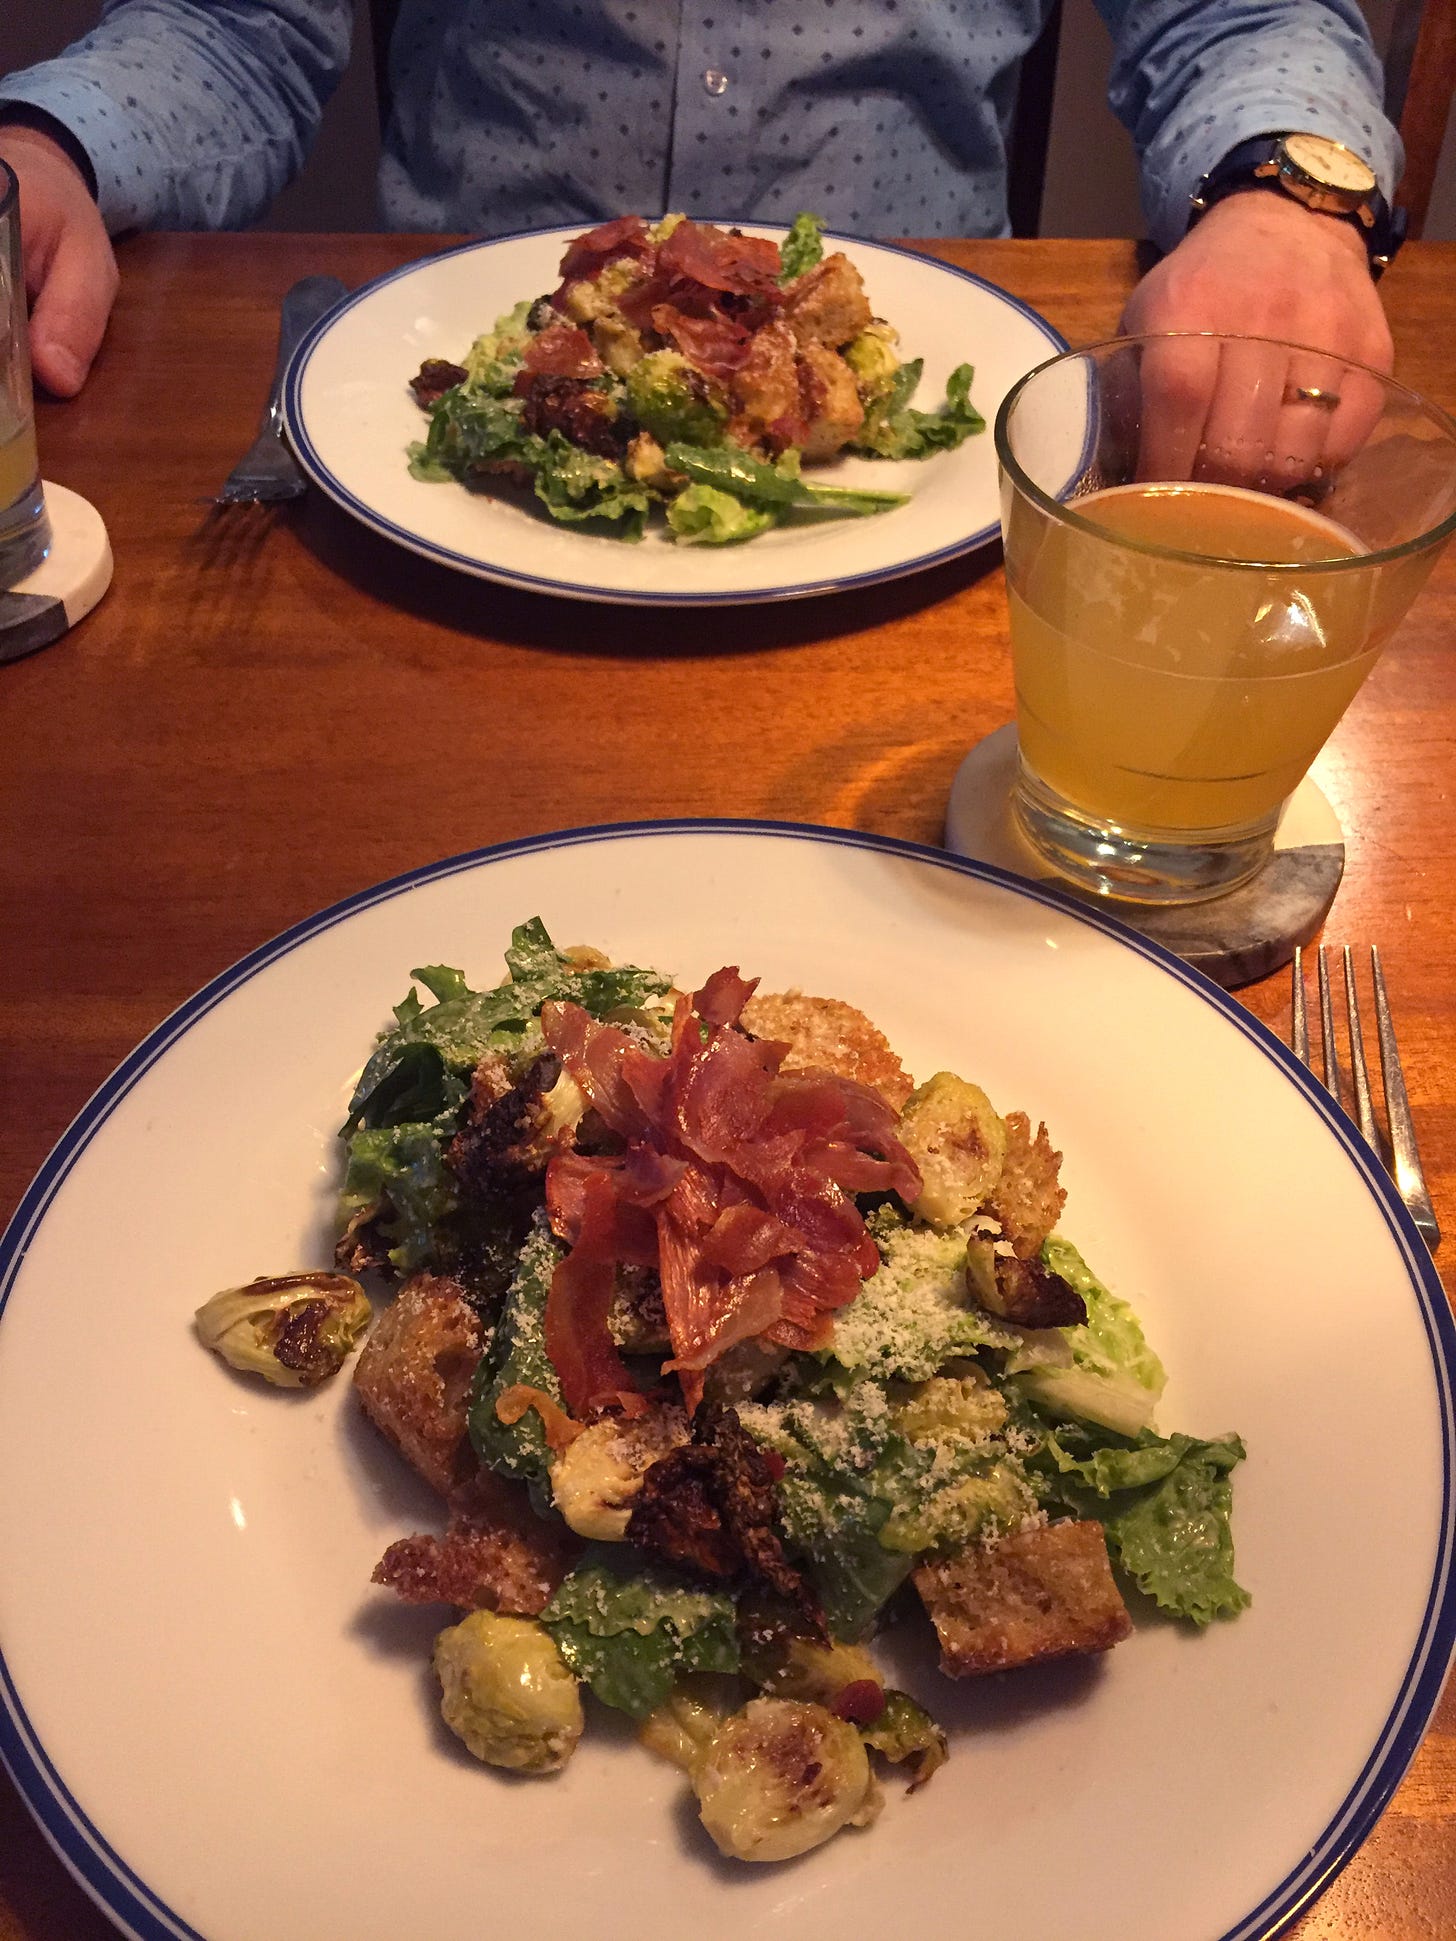 Two plates across from each other at the table, each with a serving of Caesar salad topped with pieces of prosciutto and finely grated parmesan. Large croutons and charred, roasted brussels sprouts are visible throughout the salad.